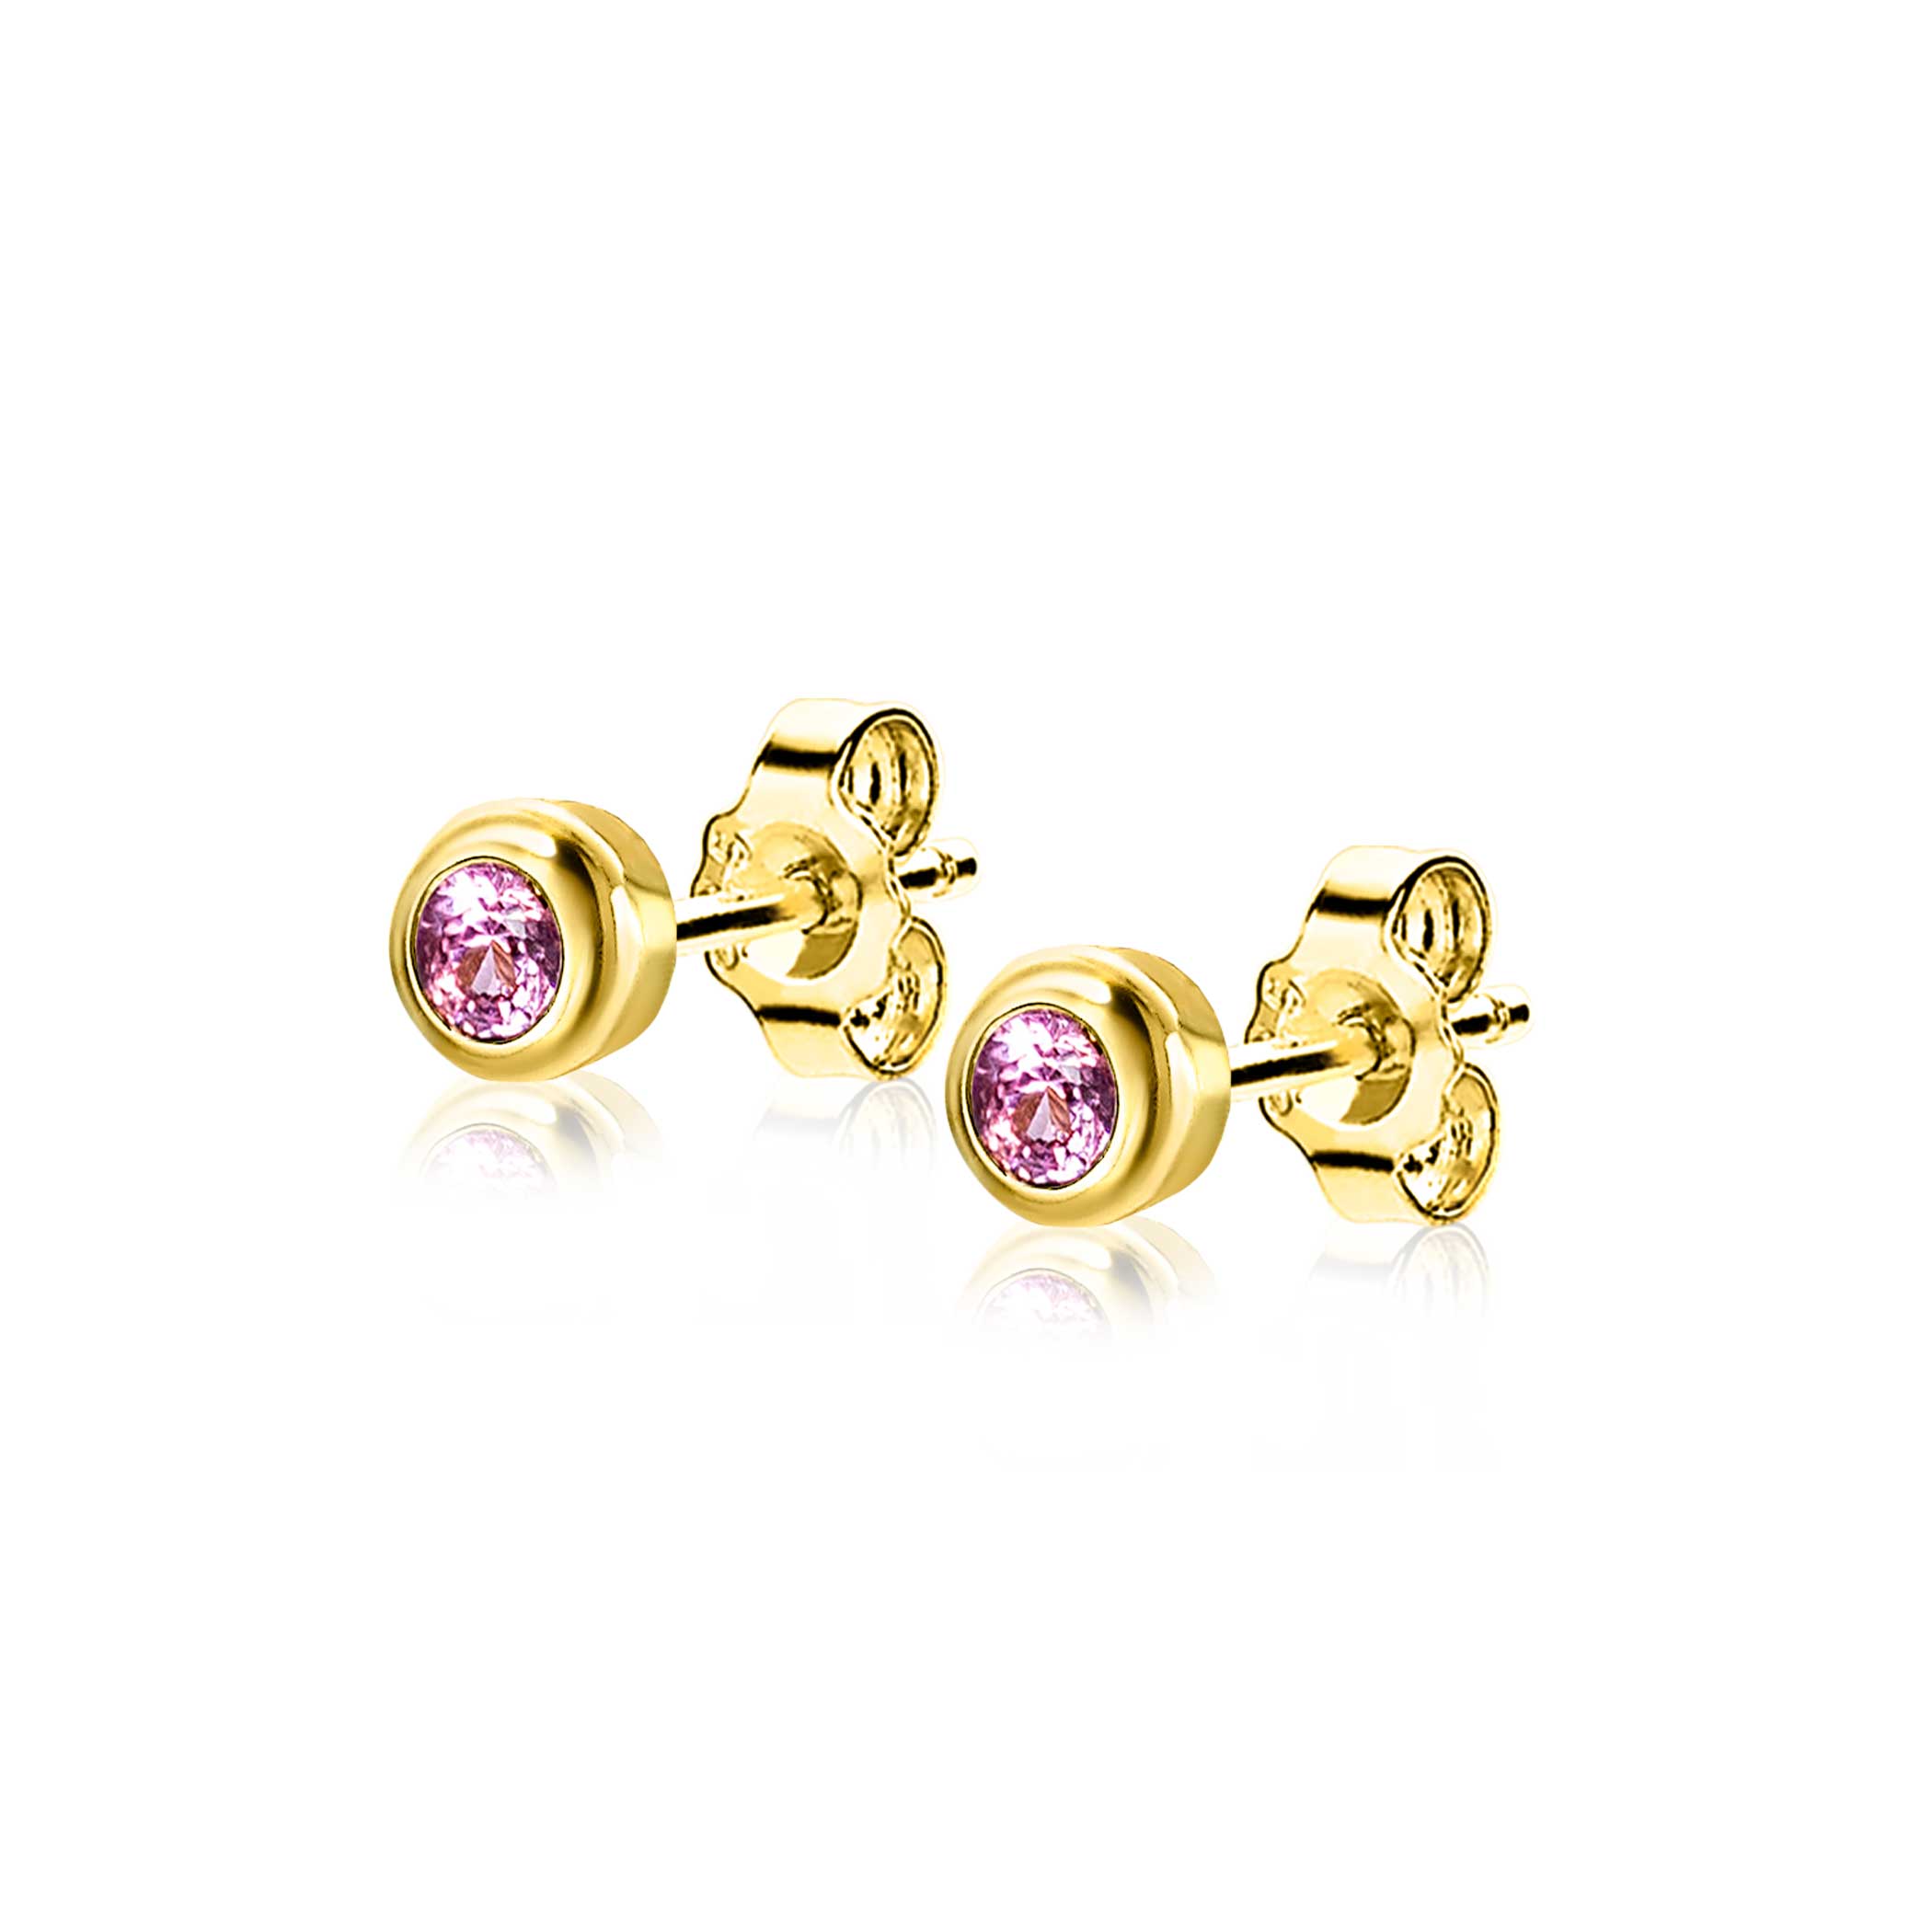 OCTOBER Stud Earrings 4mm Gold Plated with Birthstone Pink Rose Quartz Zirconia